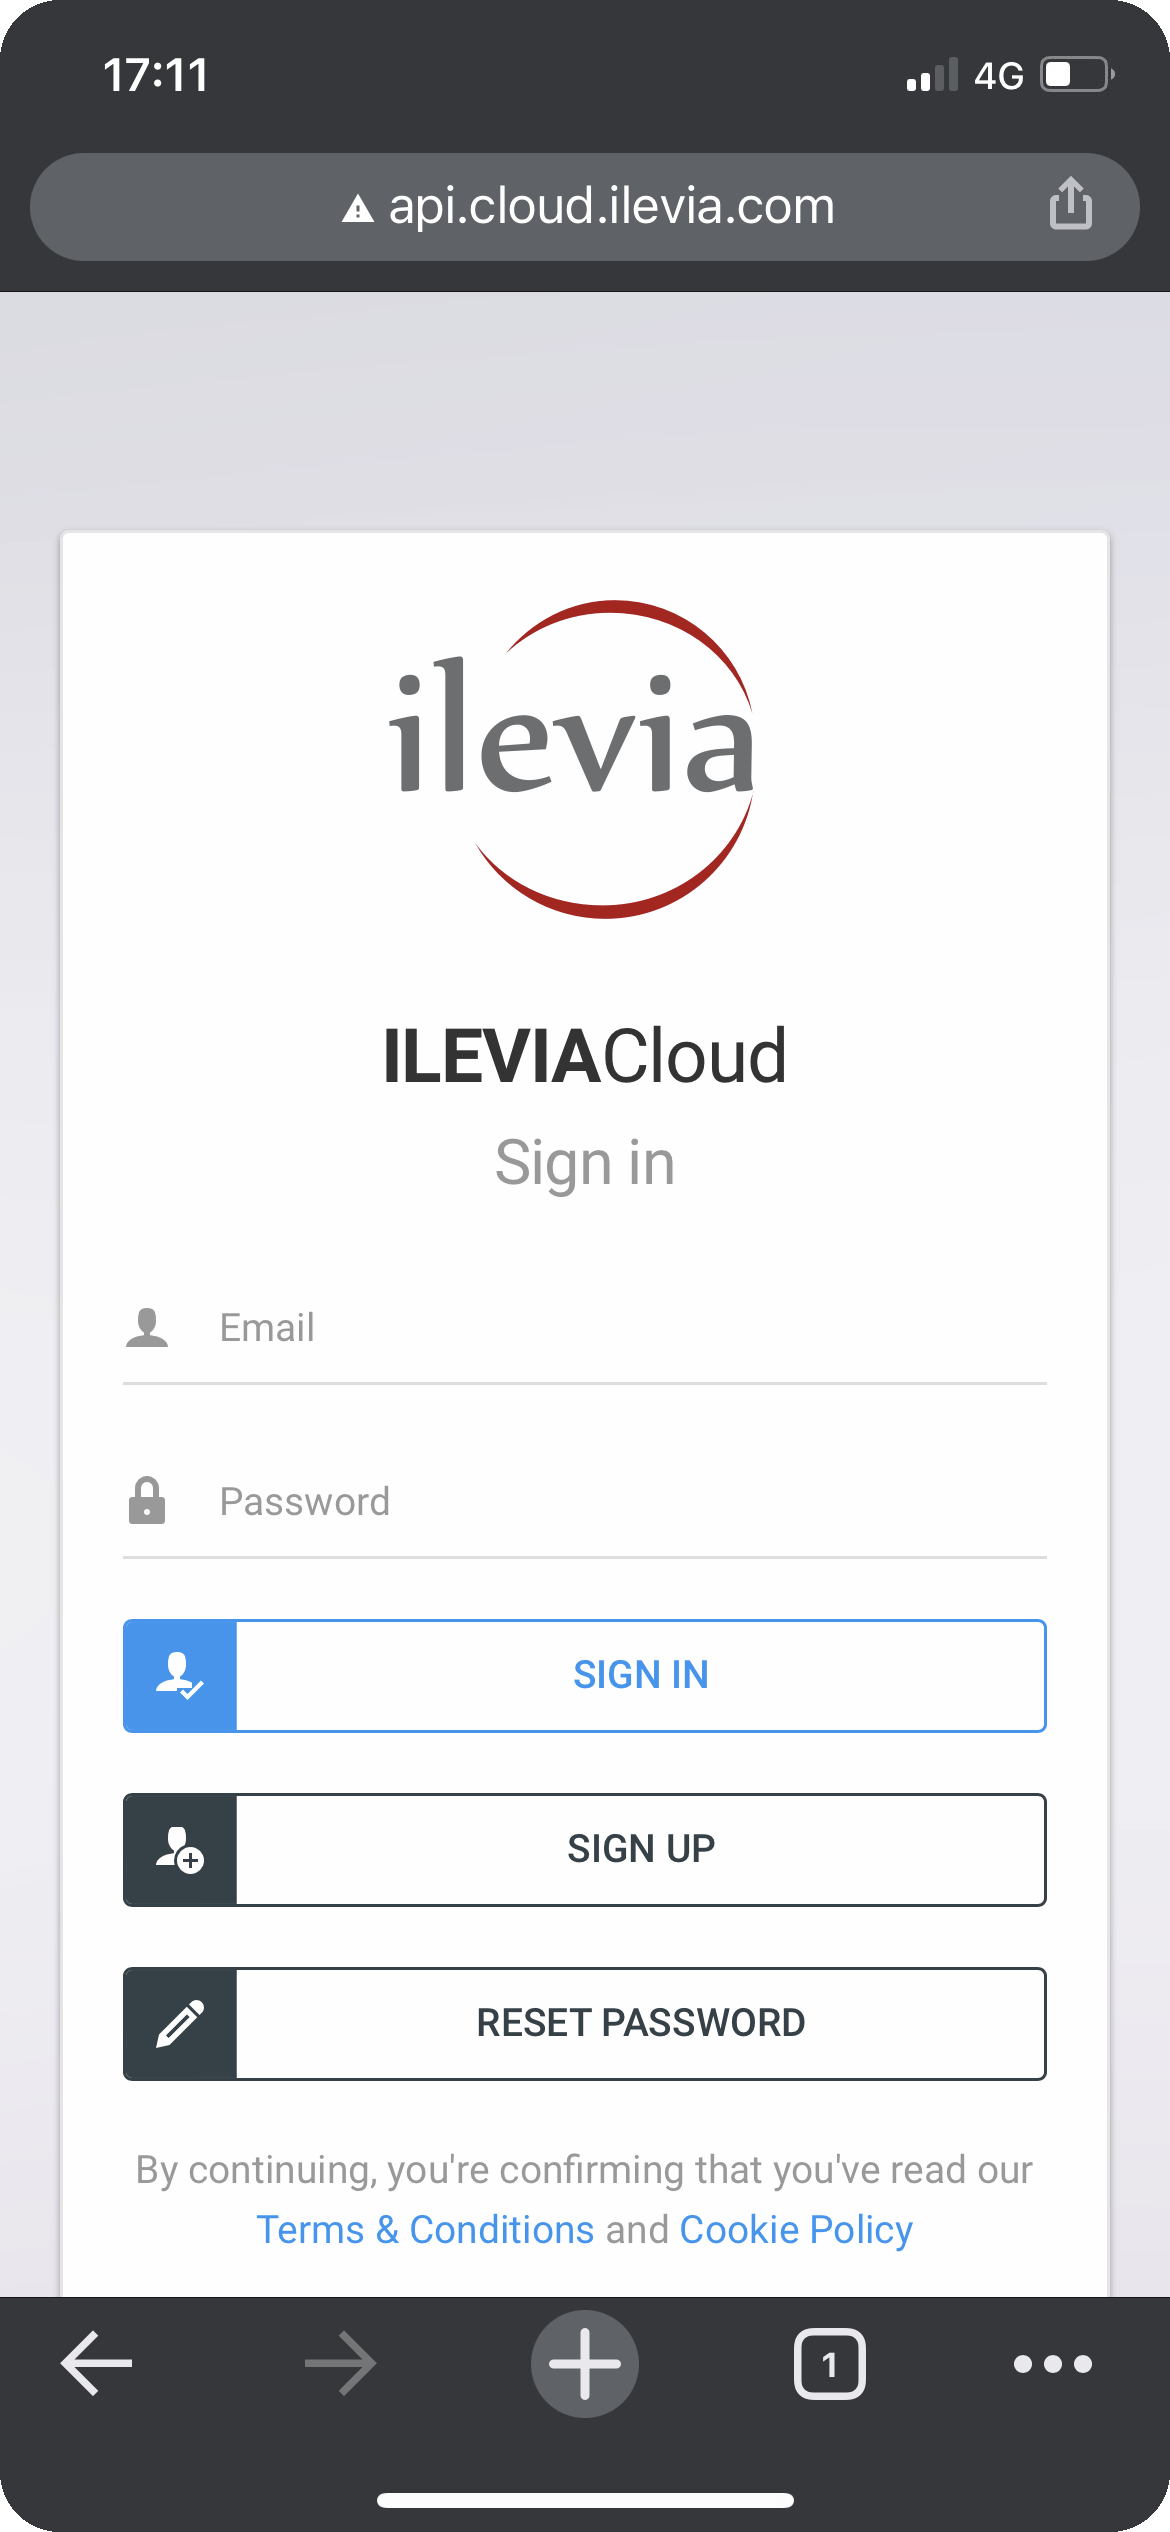 How to sing up in the Ilevia Cloud to register the EVE Server to control the Home automation system